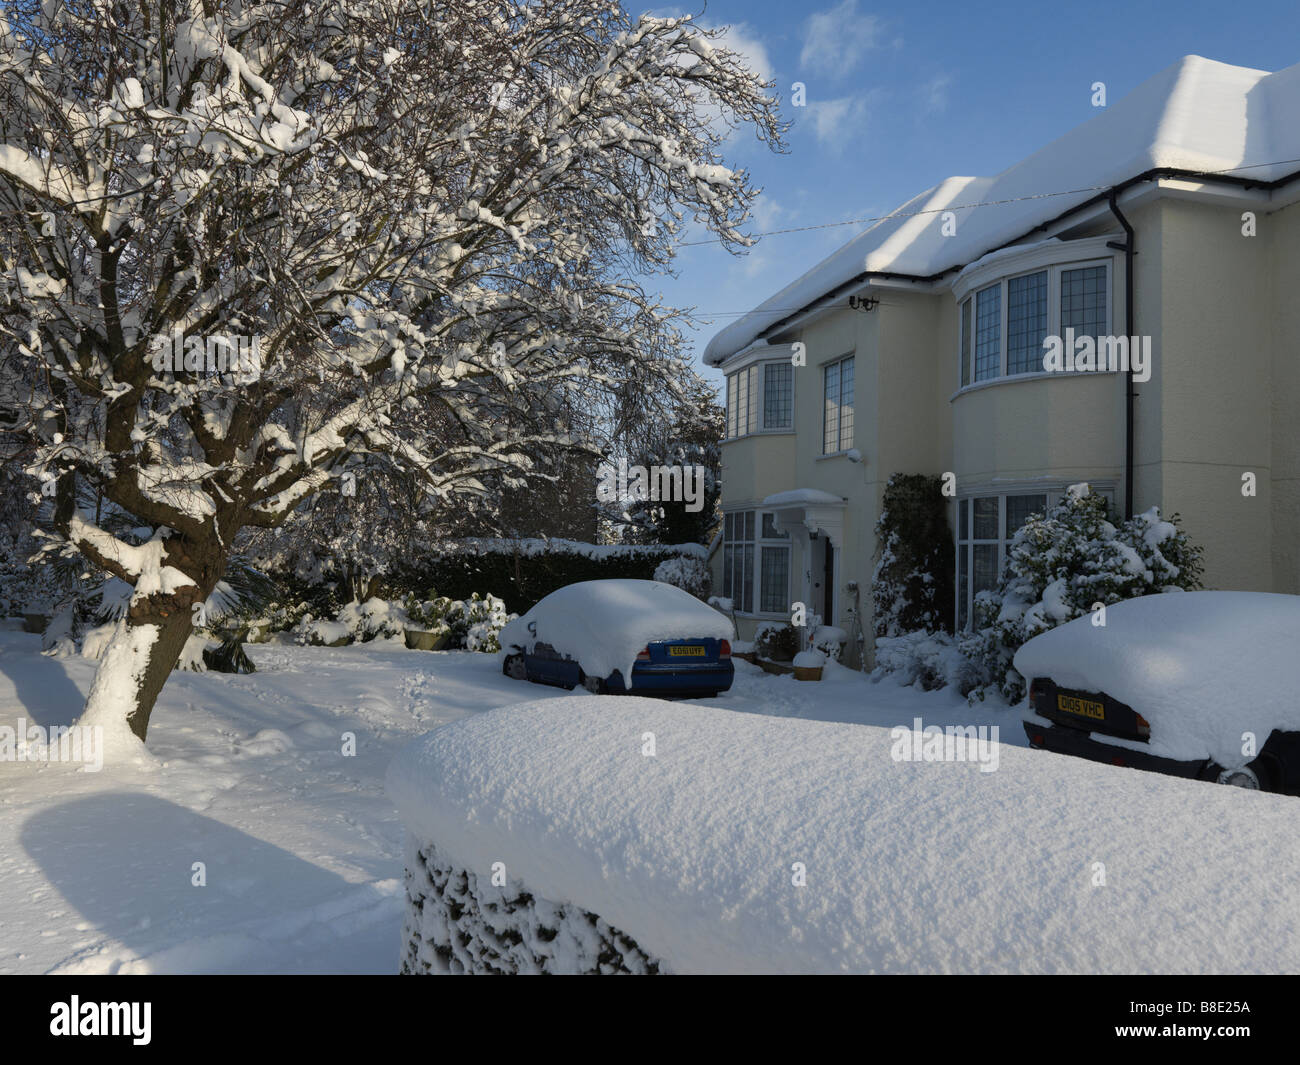 Detached House After Heavy Snowfall Surrey England Stock Photo